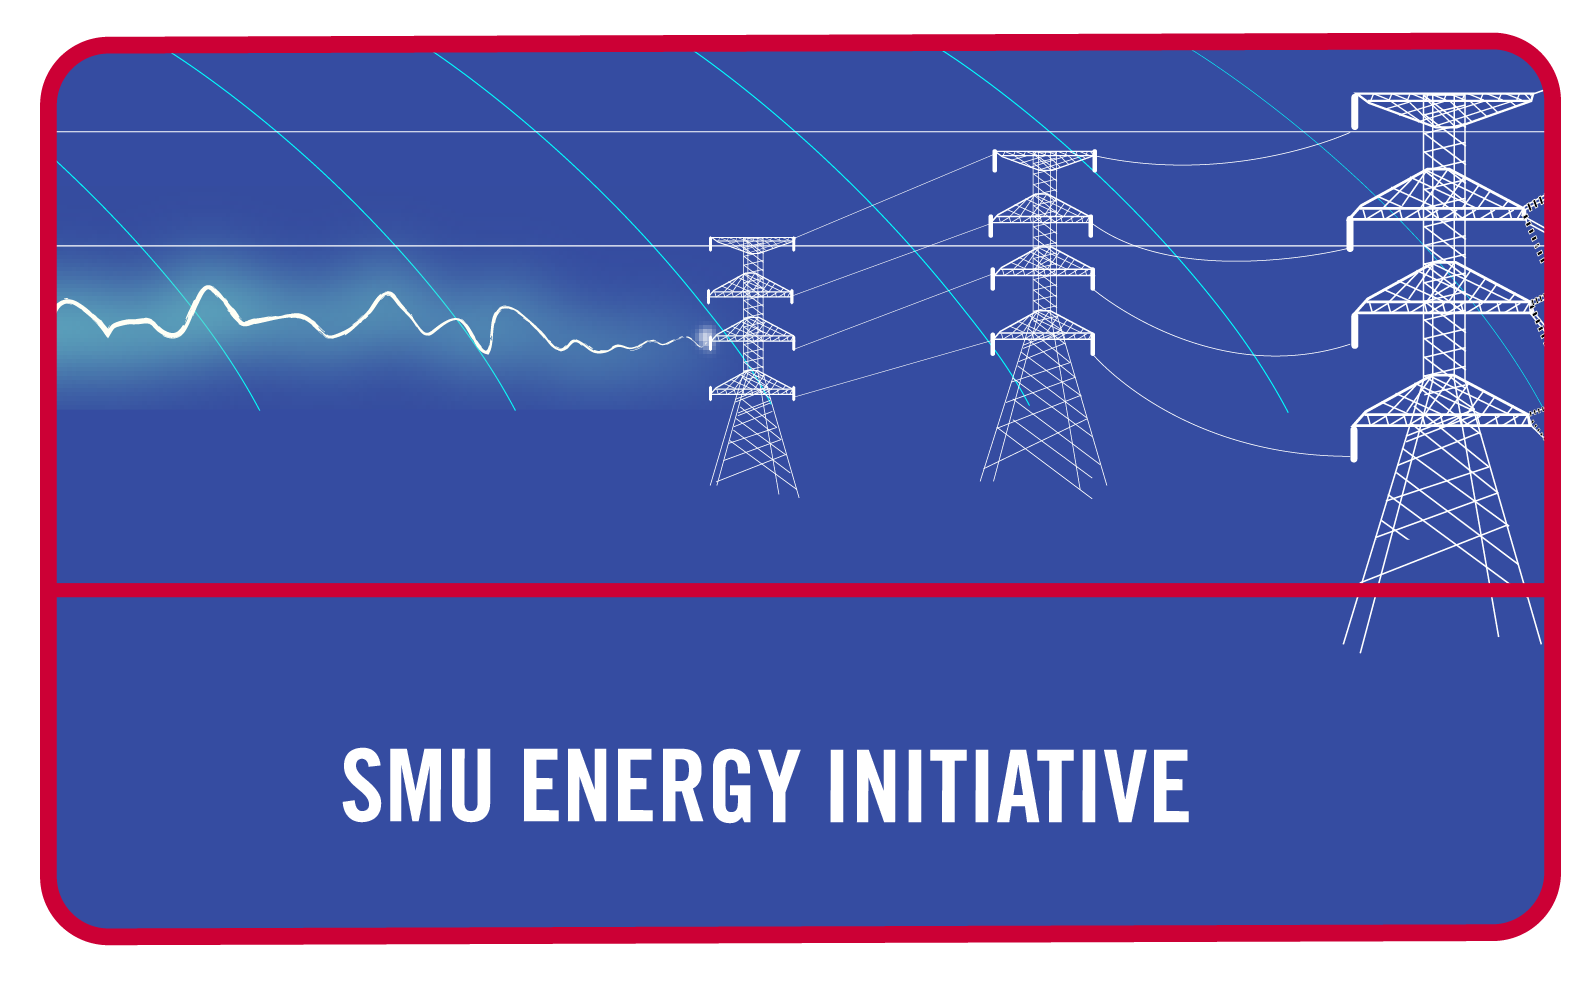 SMU Energy Initiative with figurative illustration of Power LInes and Energy